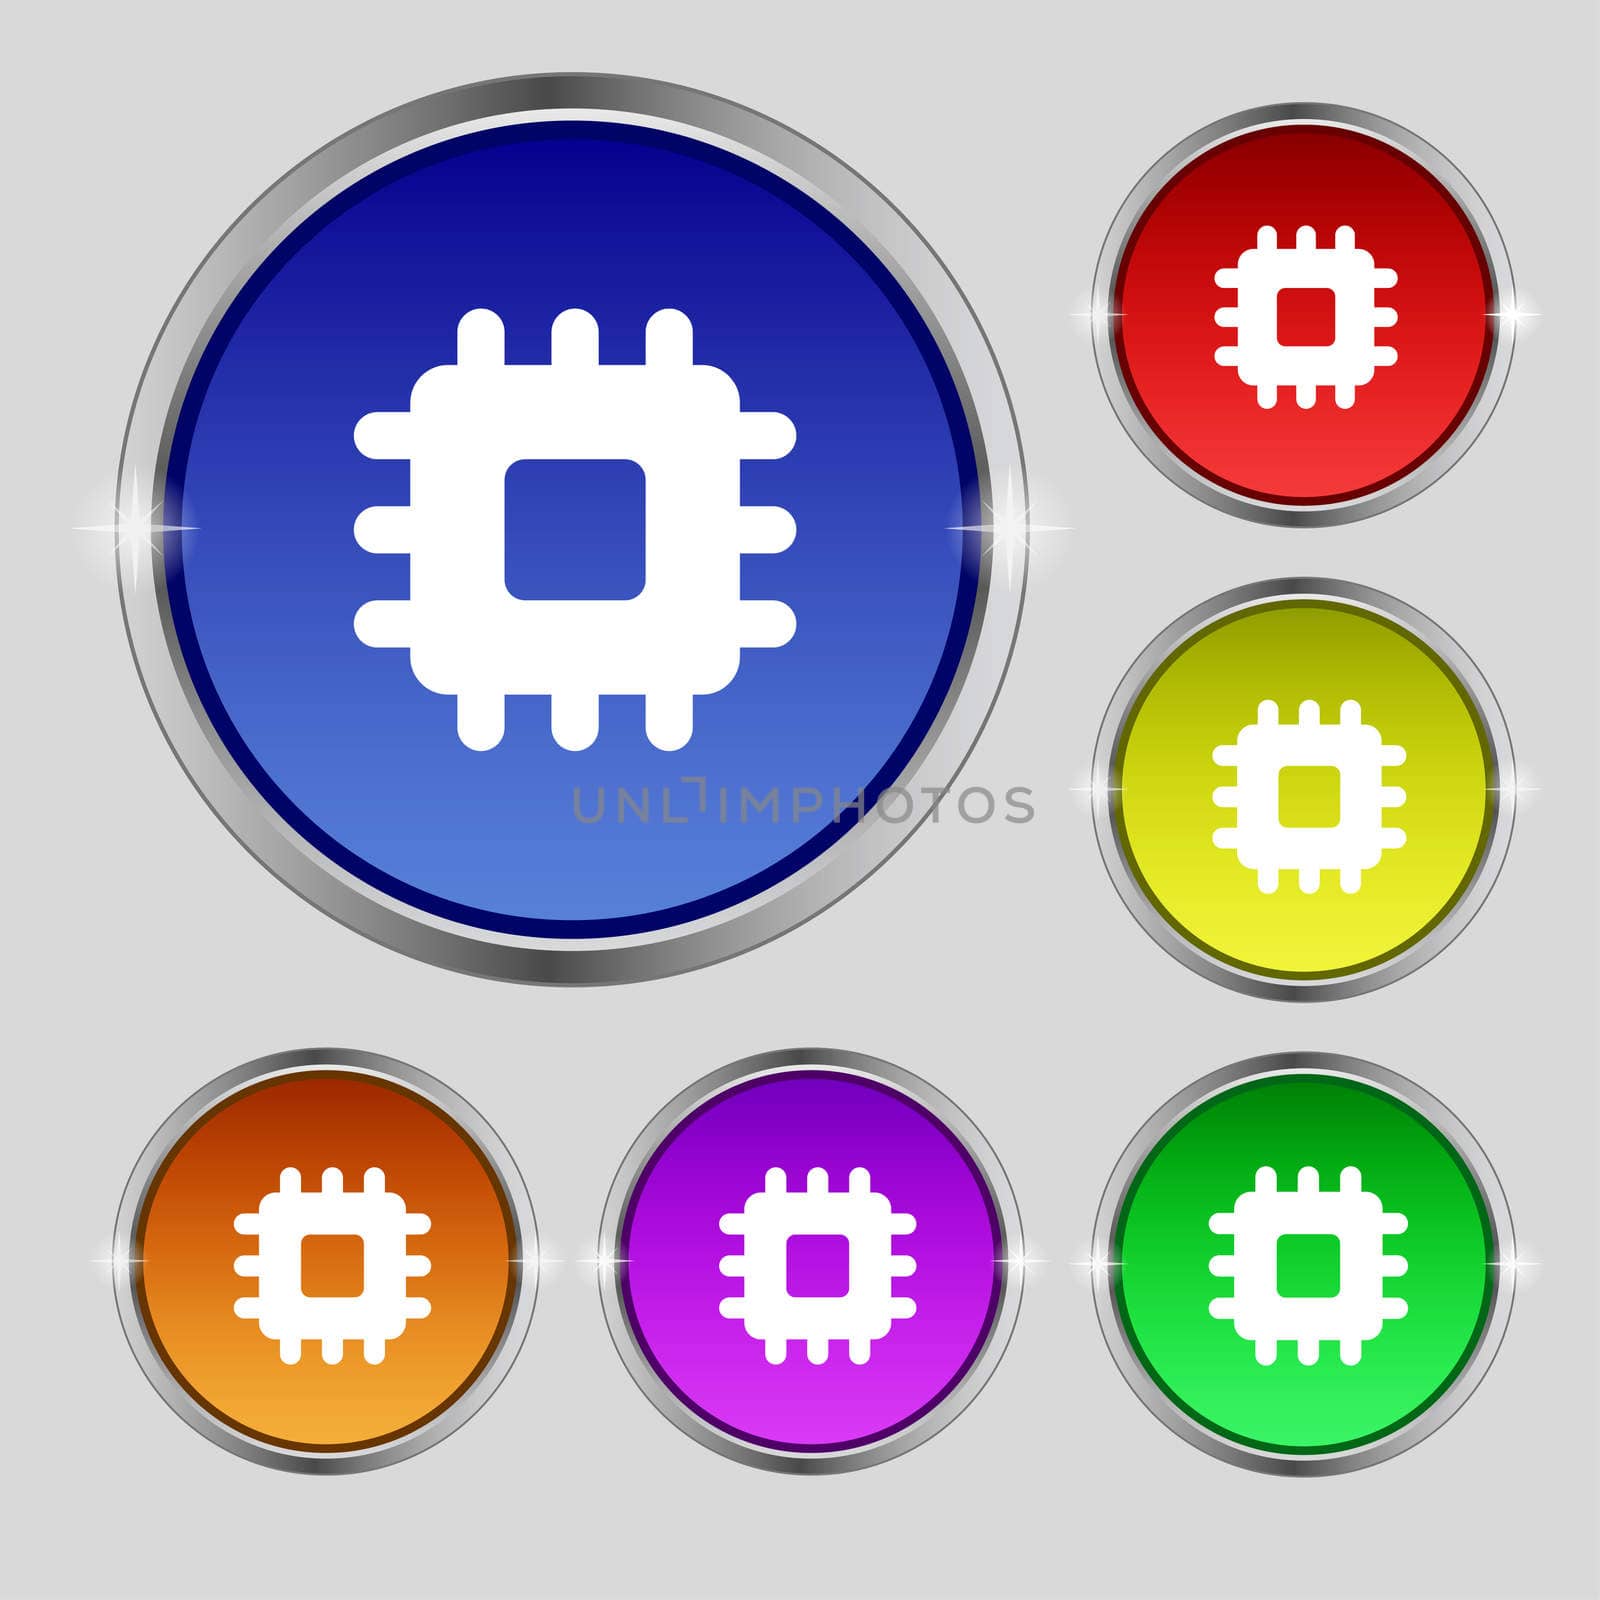 Central Processing Unit icon sign. Round symbol on bright colourful buttons. illustration